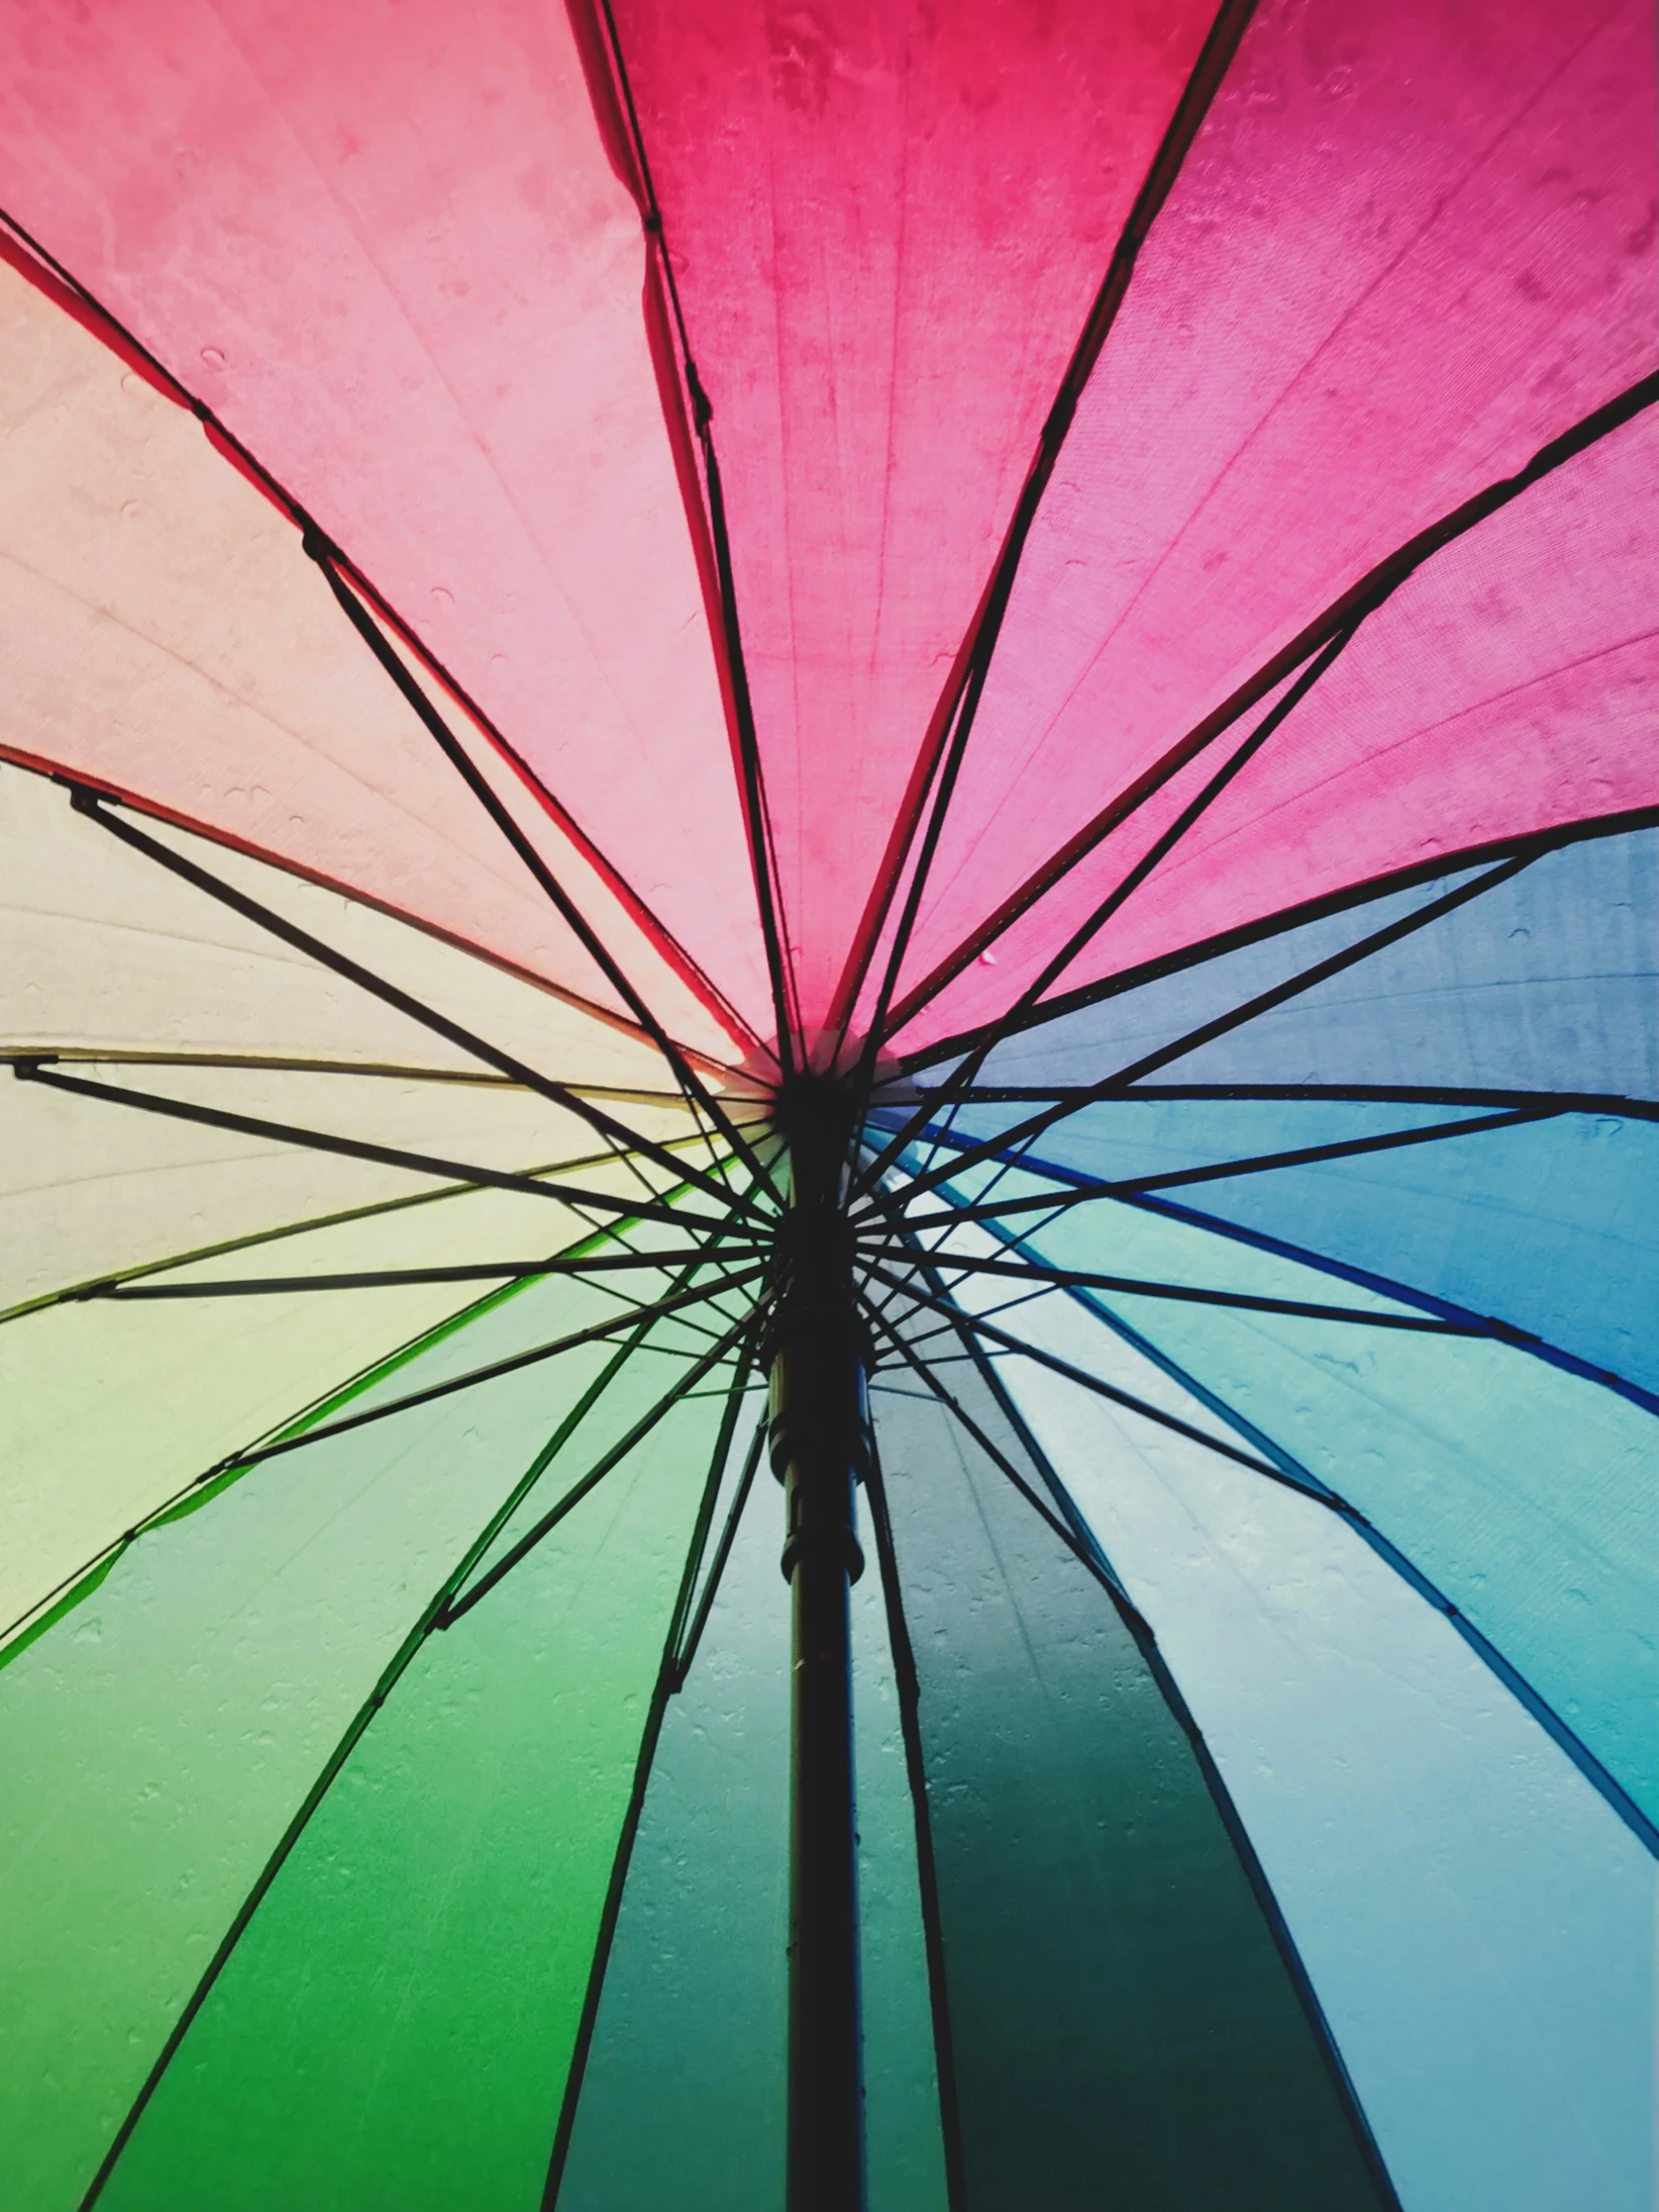 the rainbow umbrella is partially open and ready for you to use